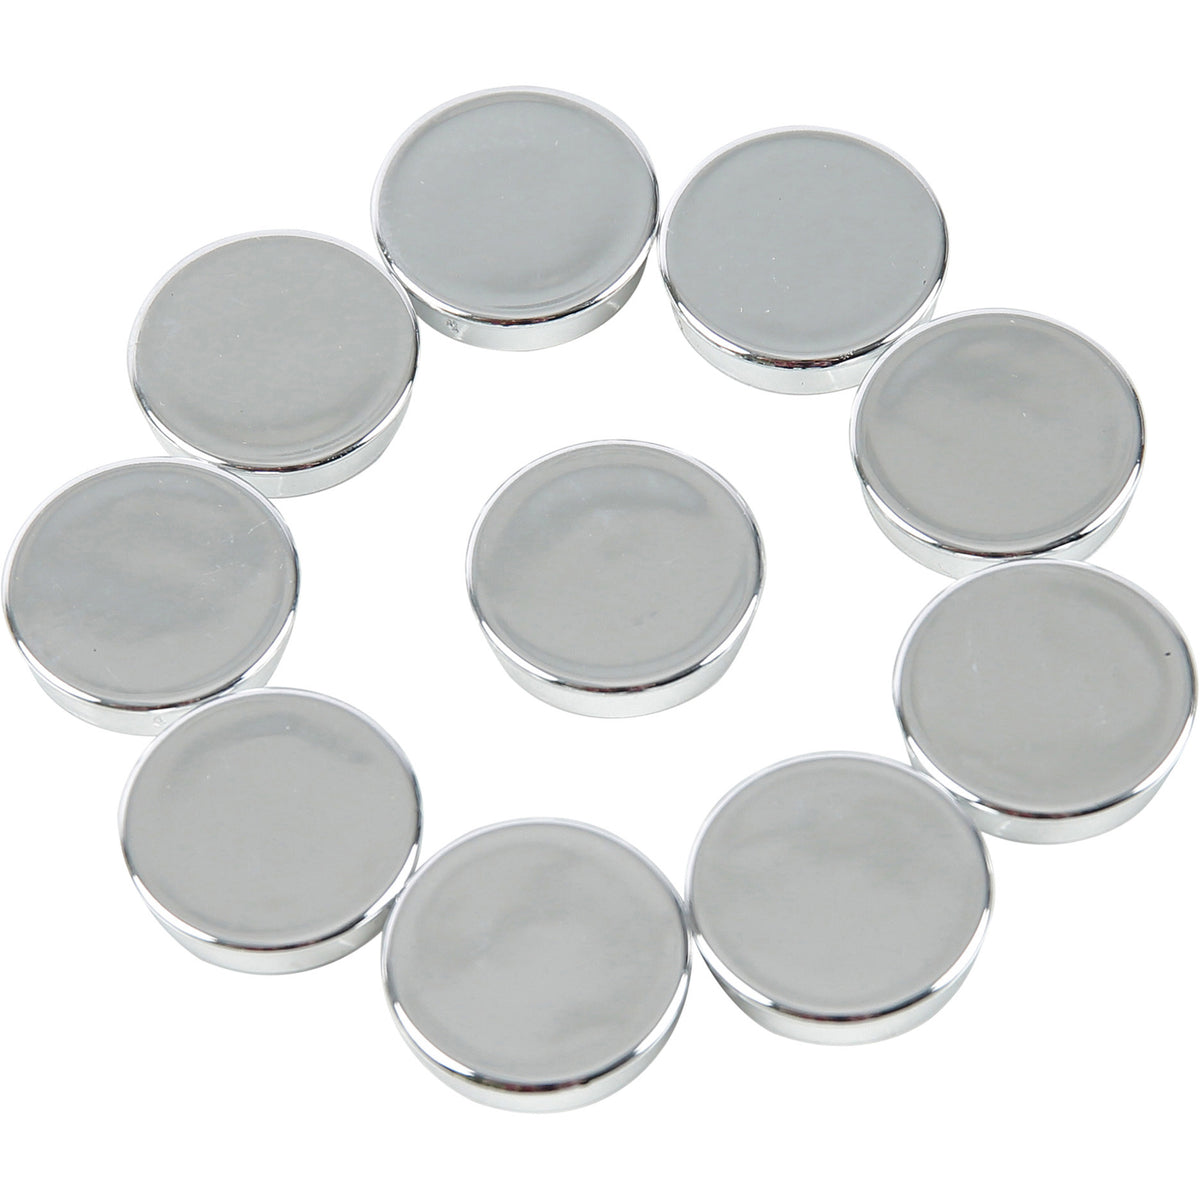 IM130809 Mastvision Round Magnets, Strong Magnets Perfect for Office Whiteboards, File Cabinets, Home Fridge, Pack of 10, 1" Diameter, Silver by MasterVision